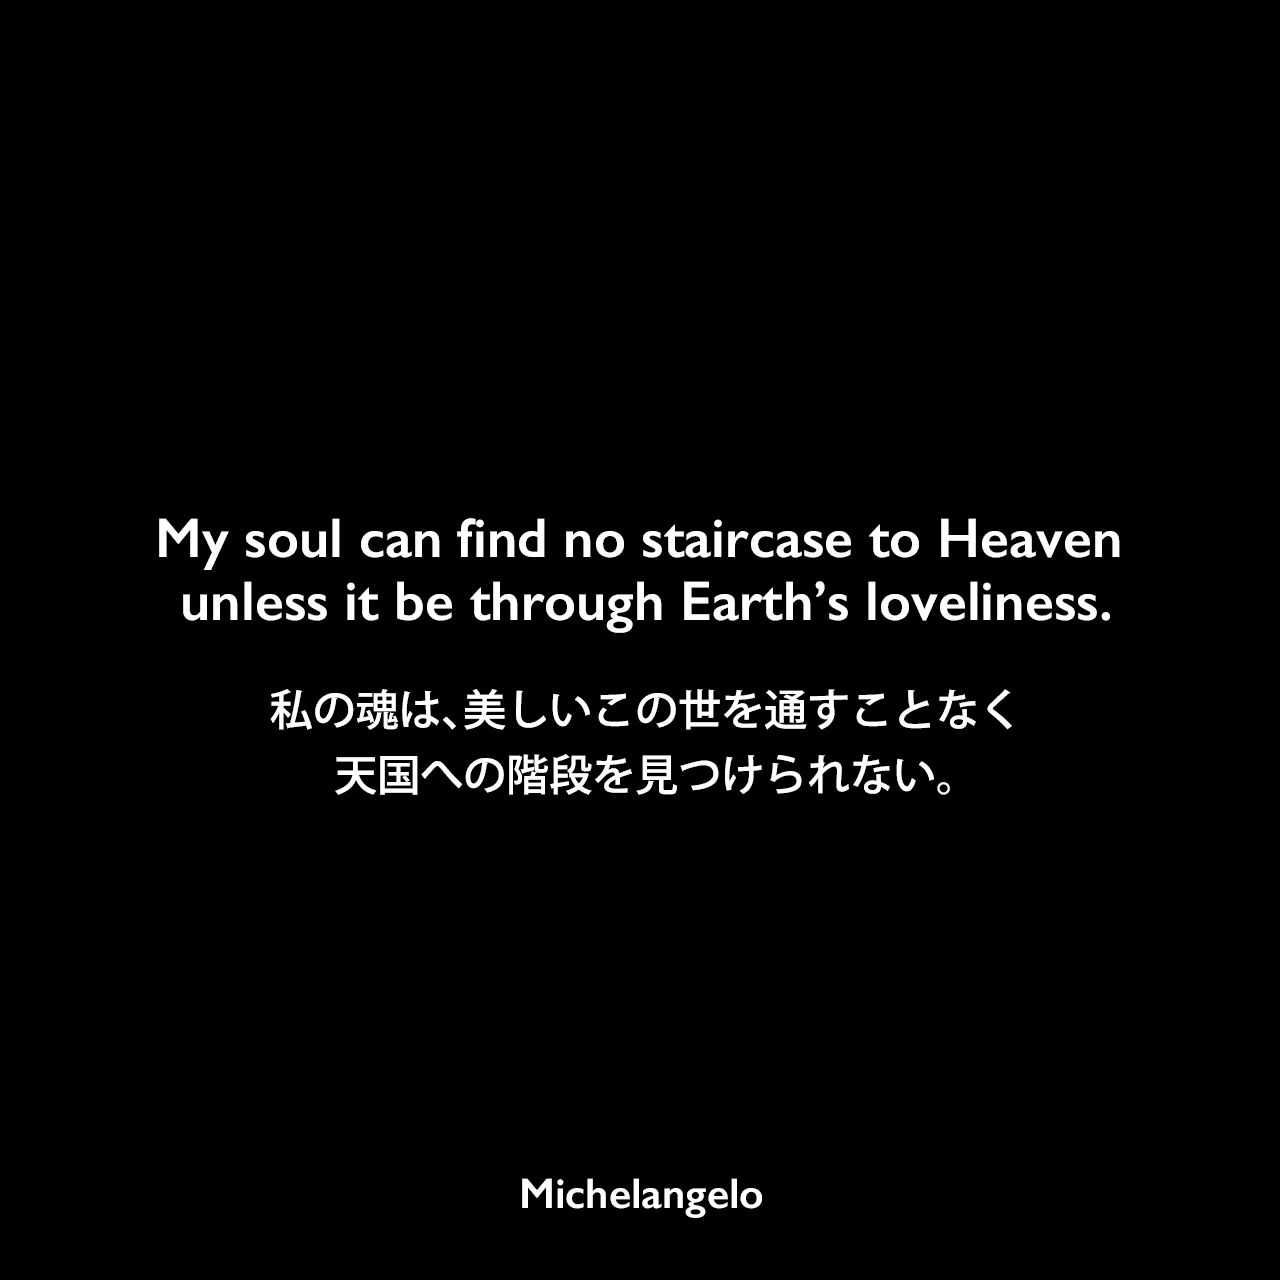 My soul can find no staircase to Heaven unless it be through Earth’s loveliness.私の魂は、美しいこの世を通すことなく、天国への階段を見つけられない。Michelangelo